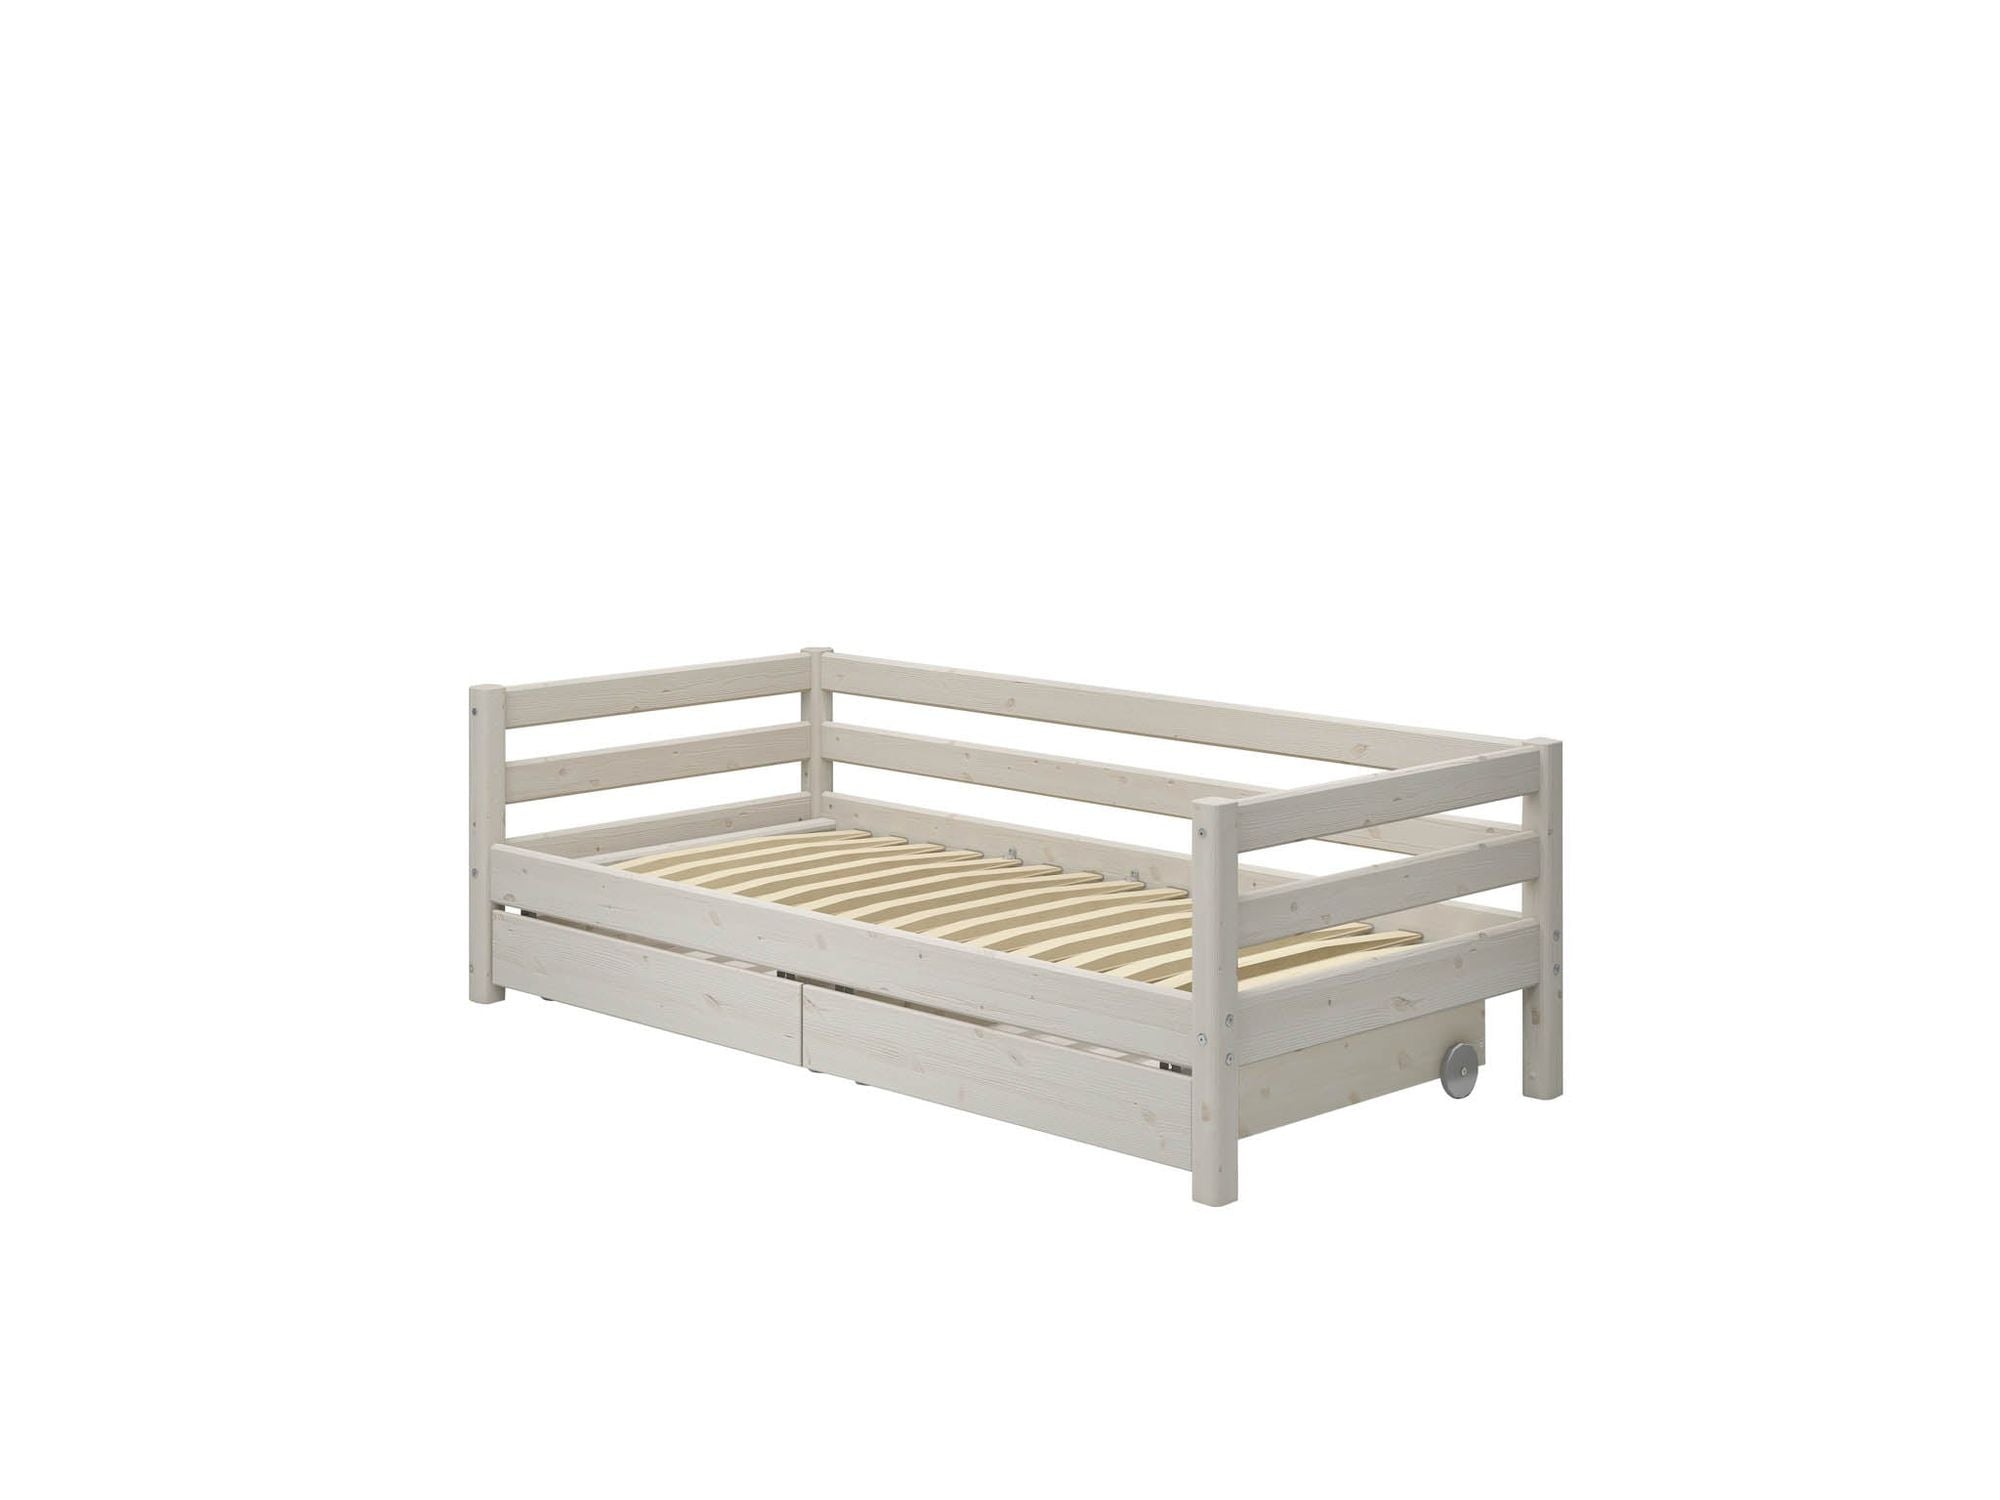 FLEXA Single bed with 2 drawers